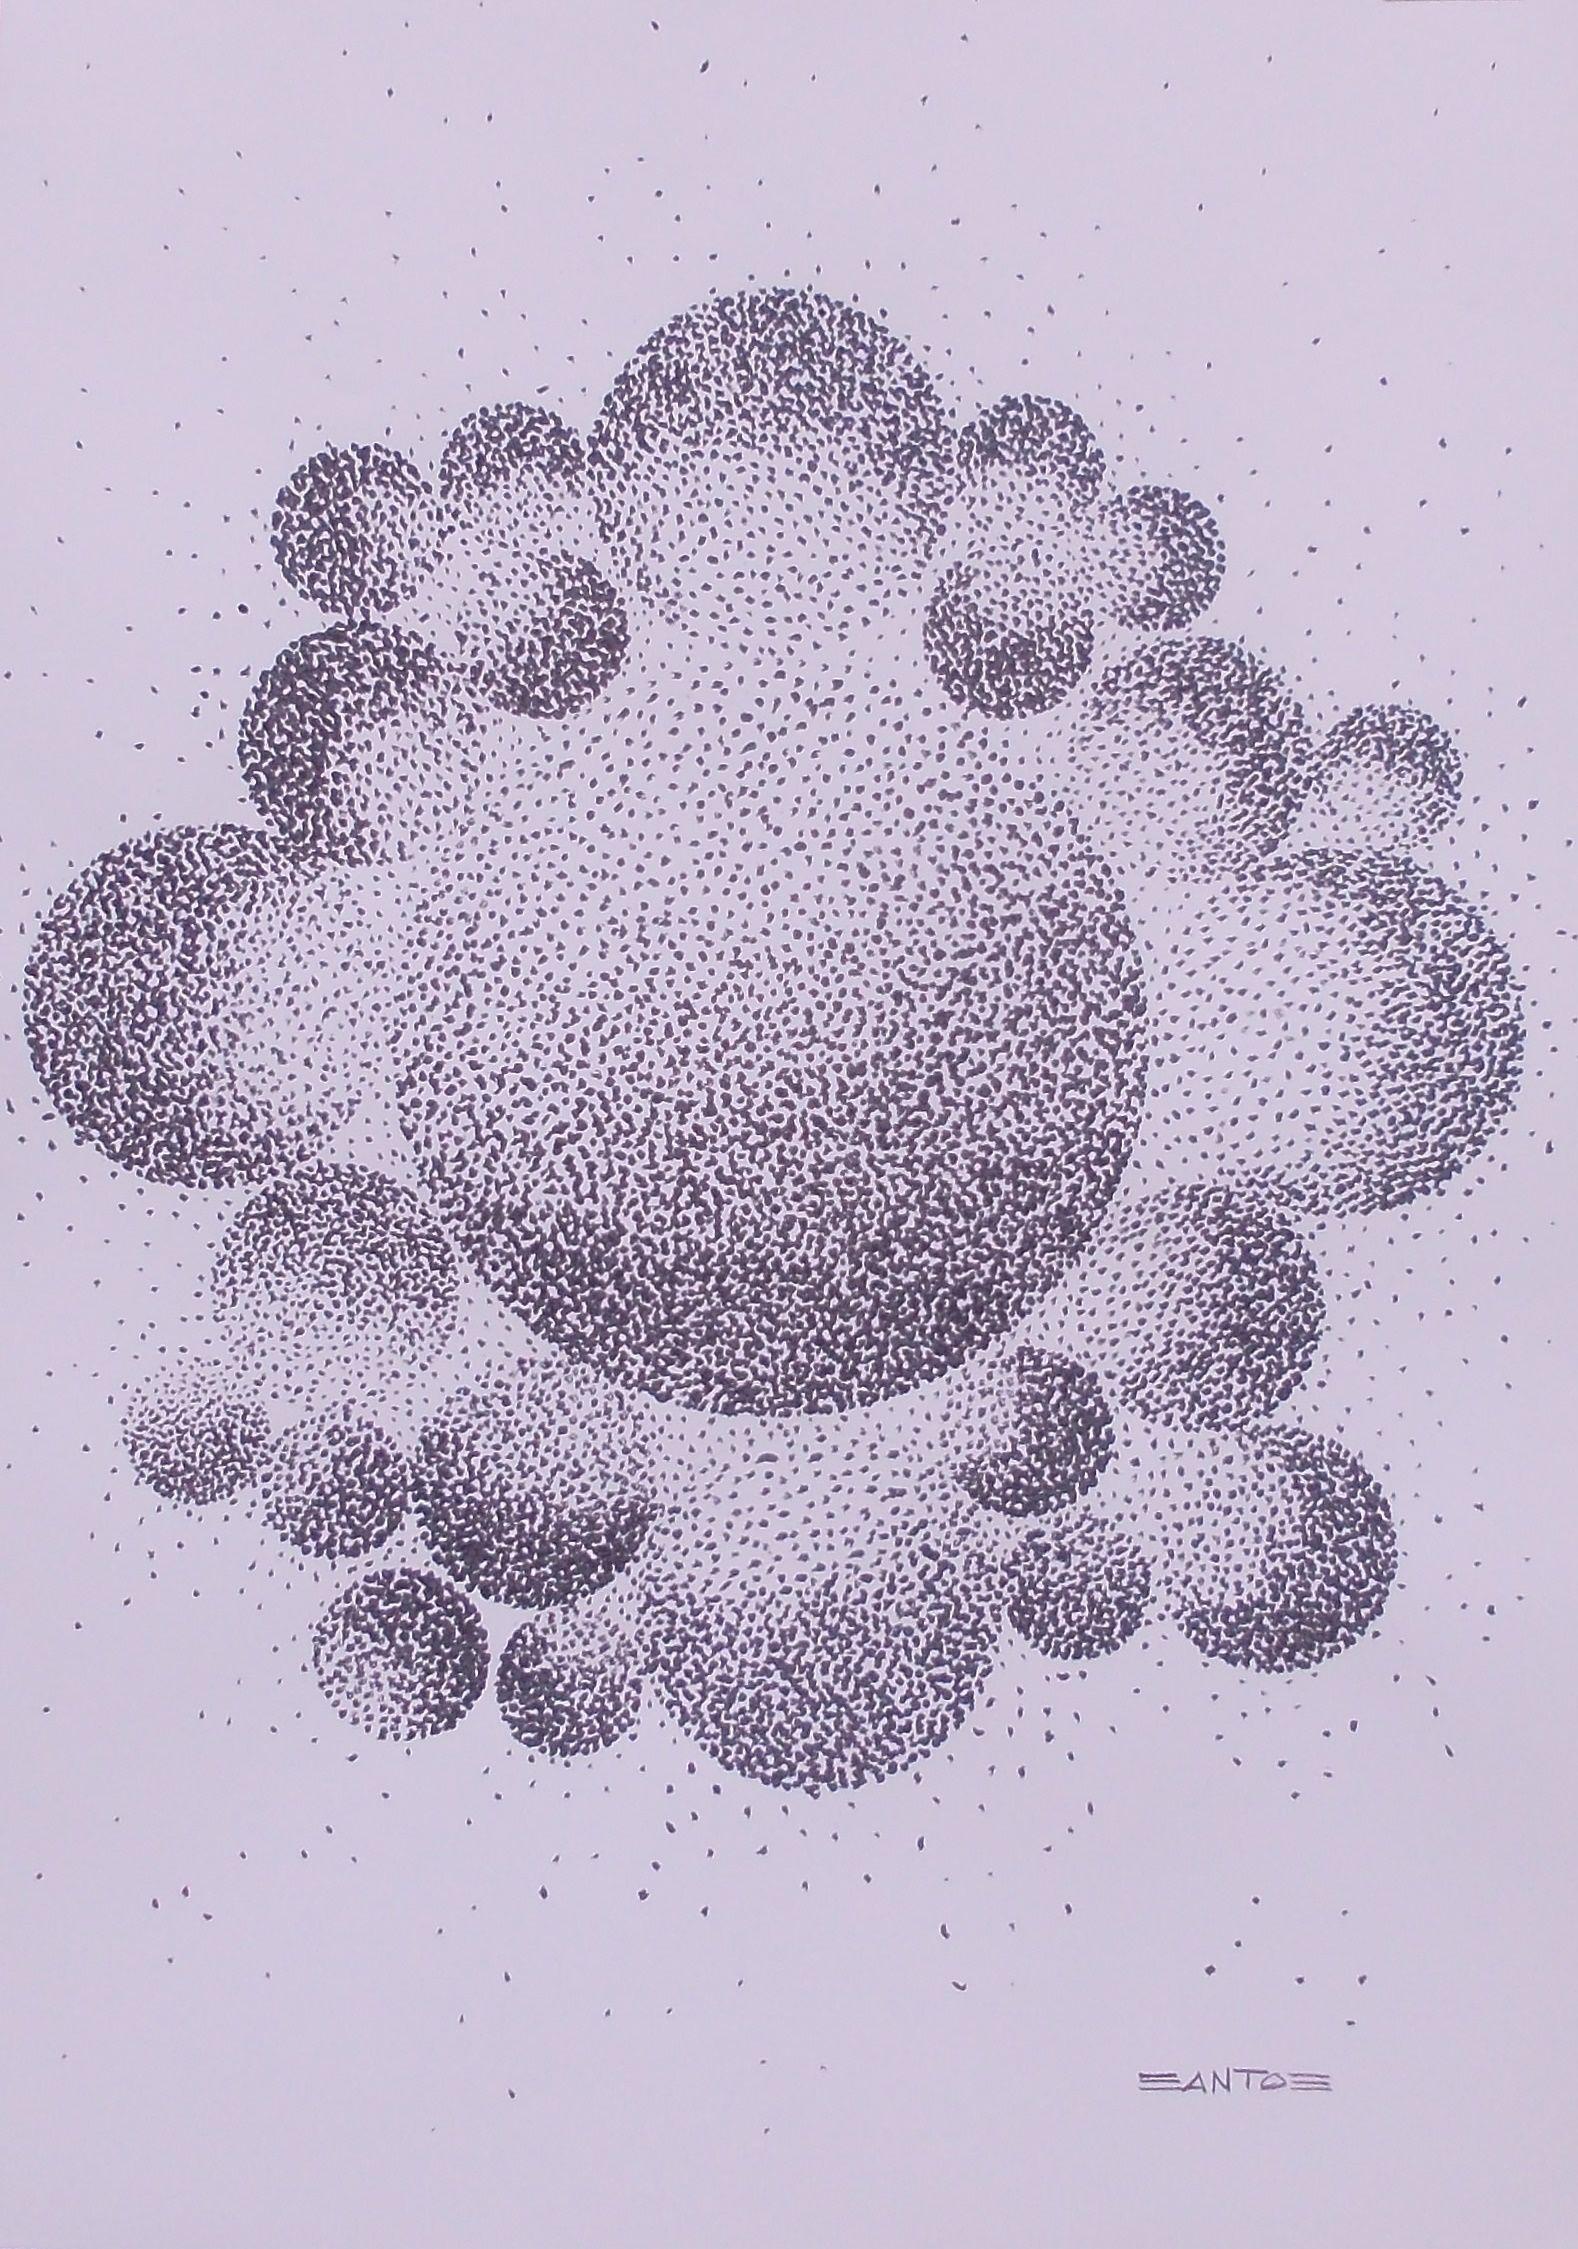 Imaginary Galaxies: Hersilia, Drawing, Pen & Ink on Paper - Art by Francisco Santos